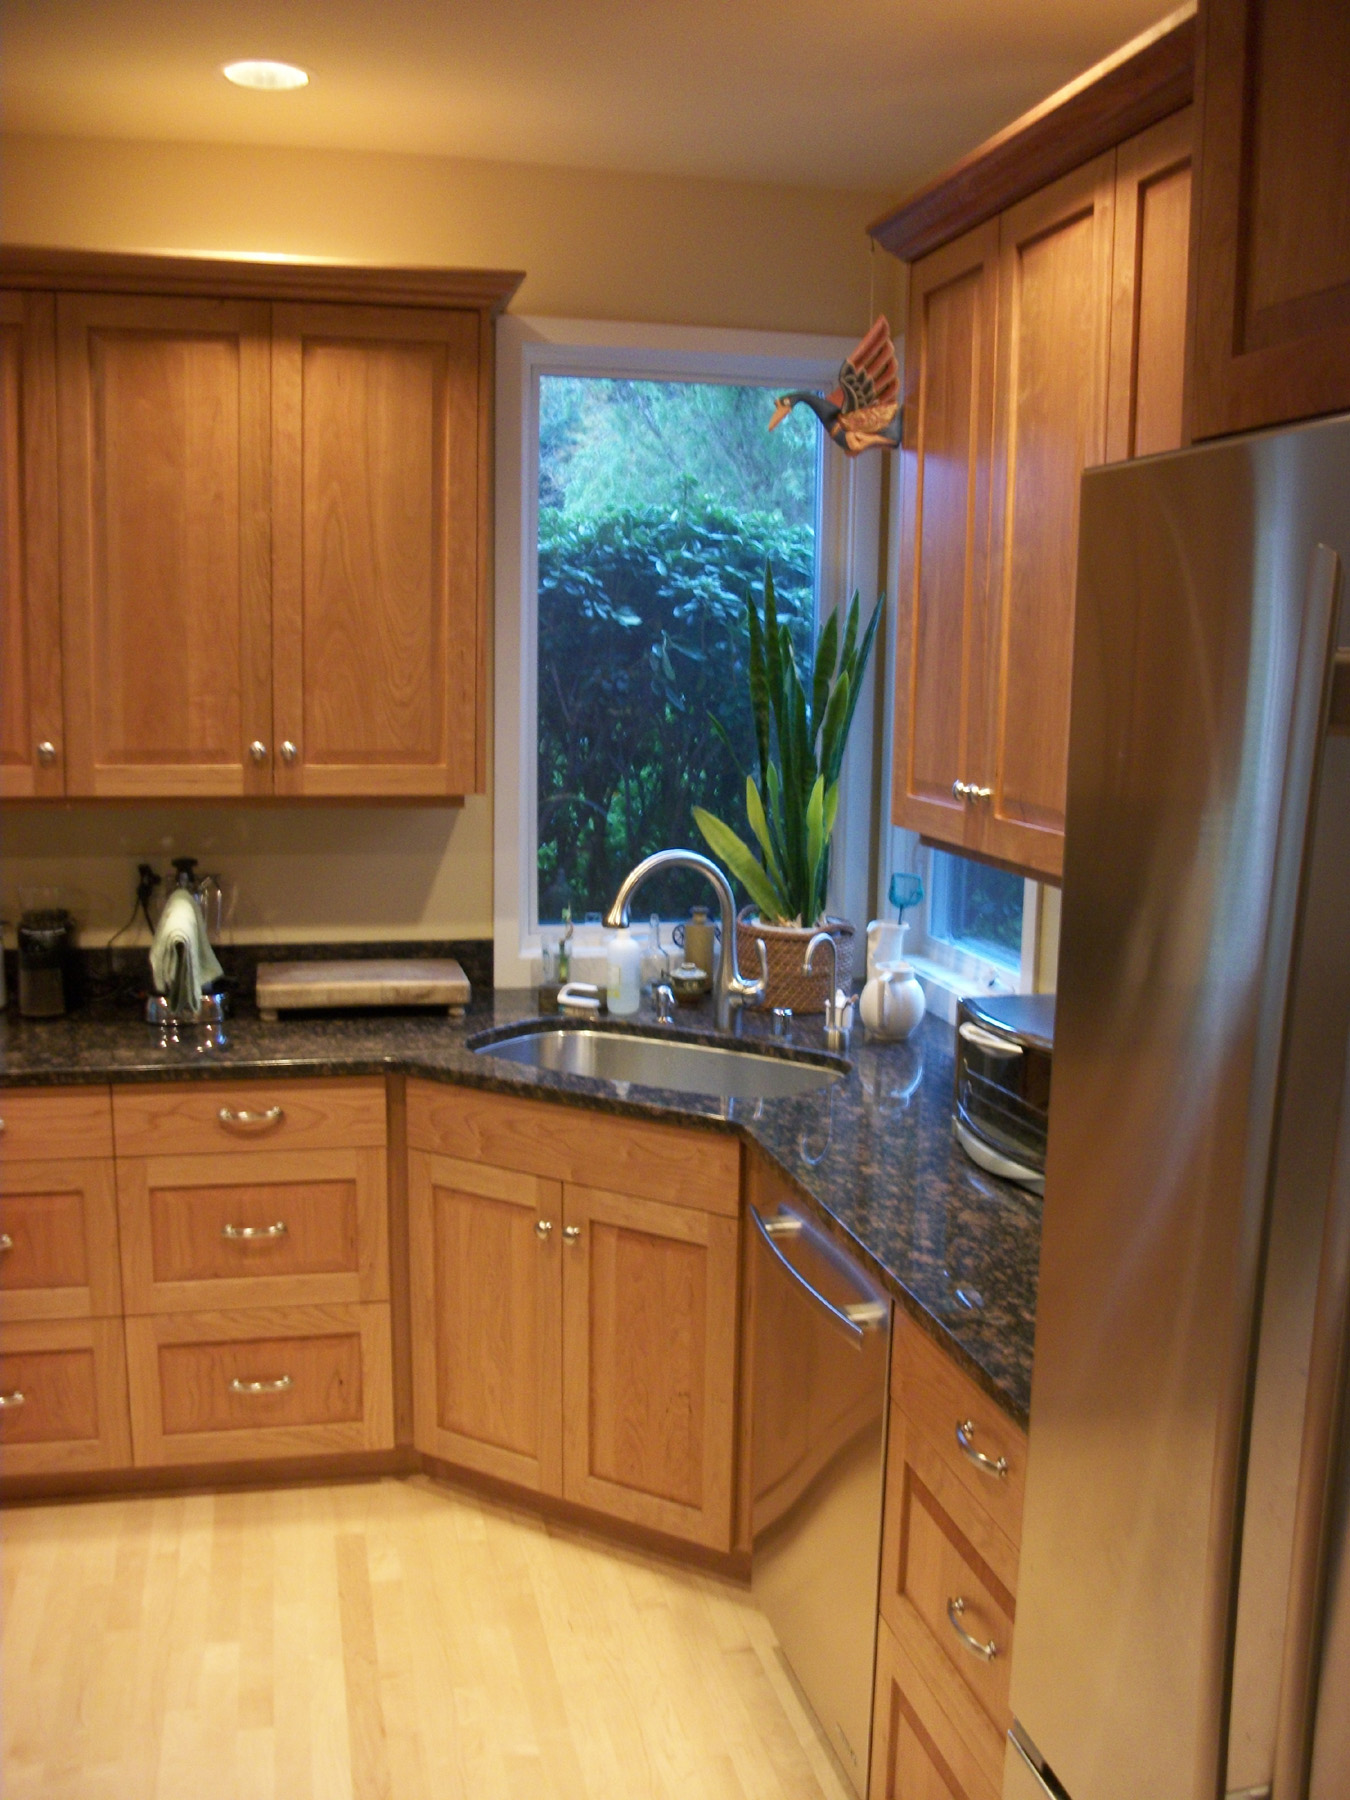 How to select your kitchen cabinet material | Rose Construction Inc